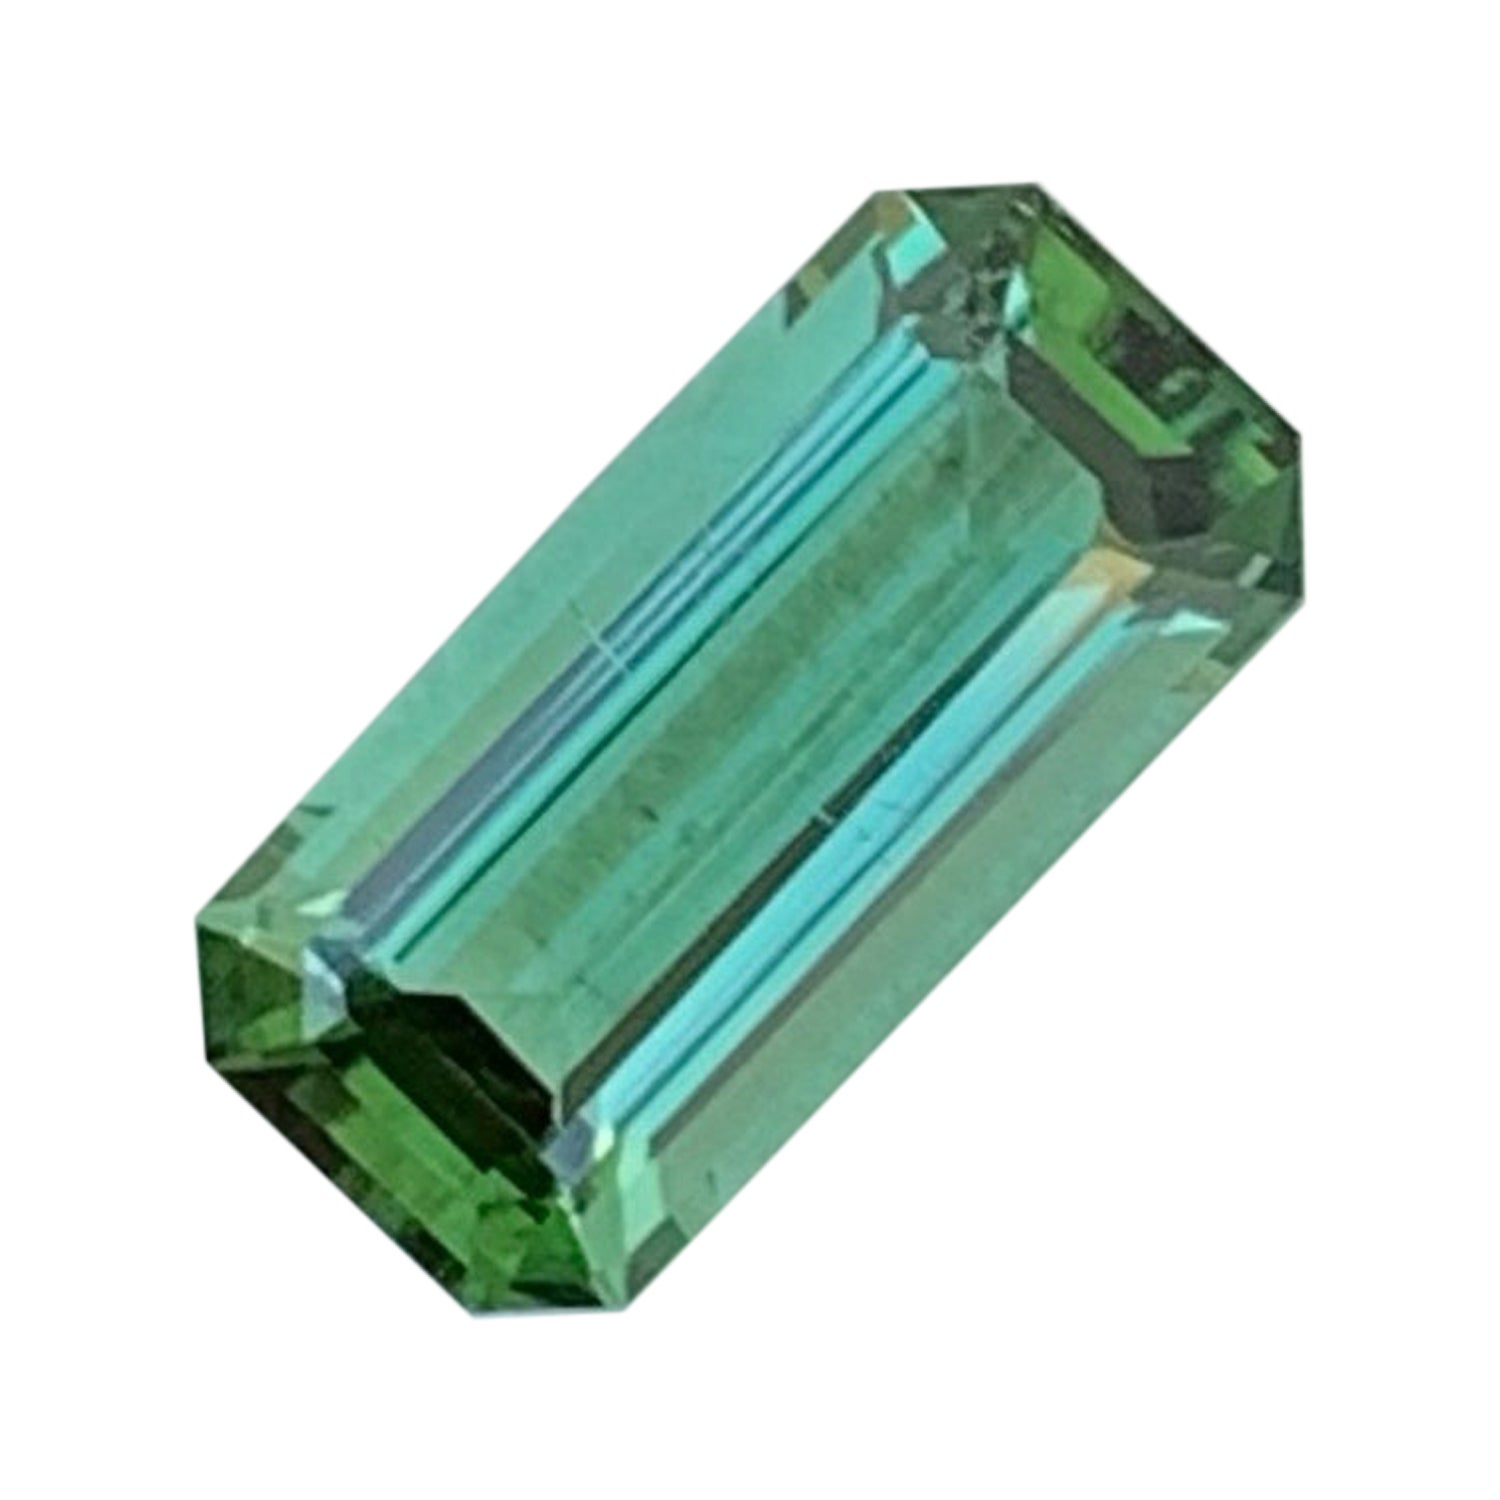 Majestic Natural Tourmaline For Ring 1.95 CT Afghan Tourmaline For Jewelry Size  For Sale